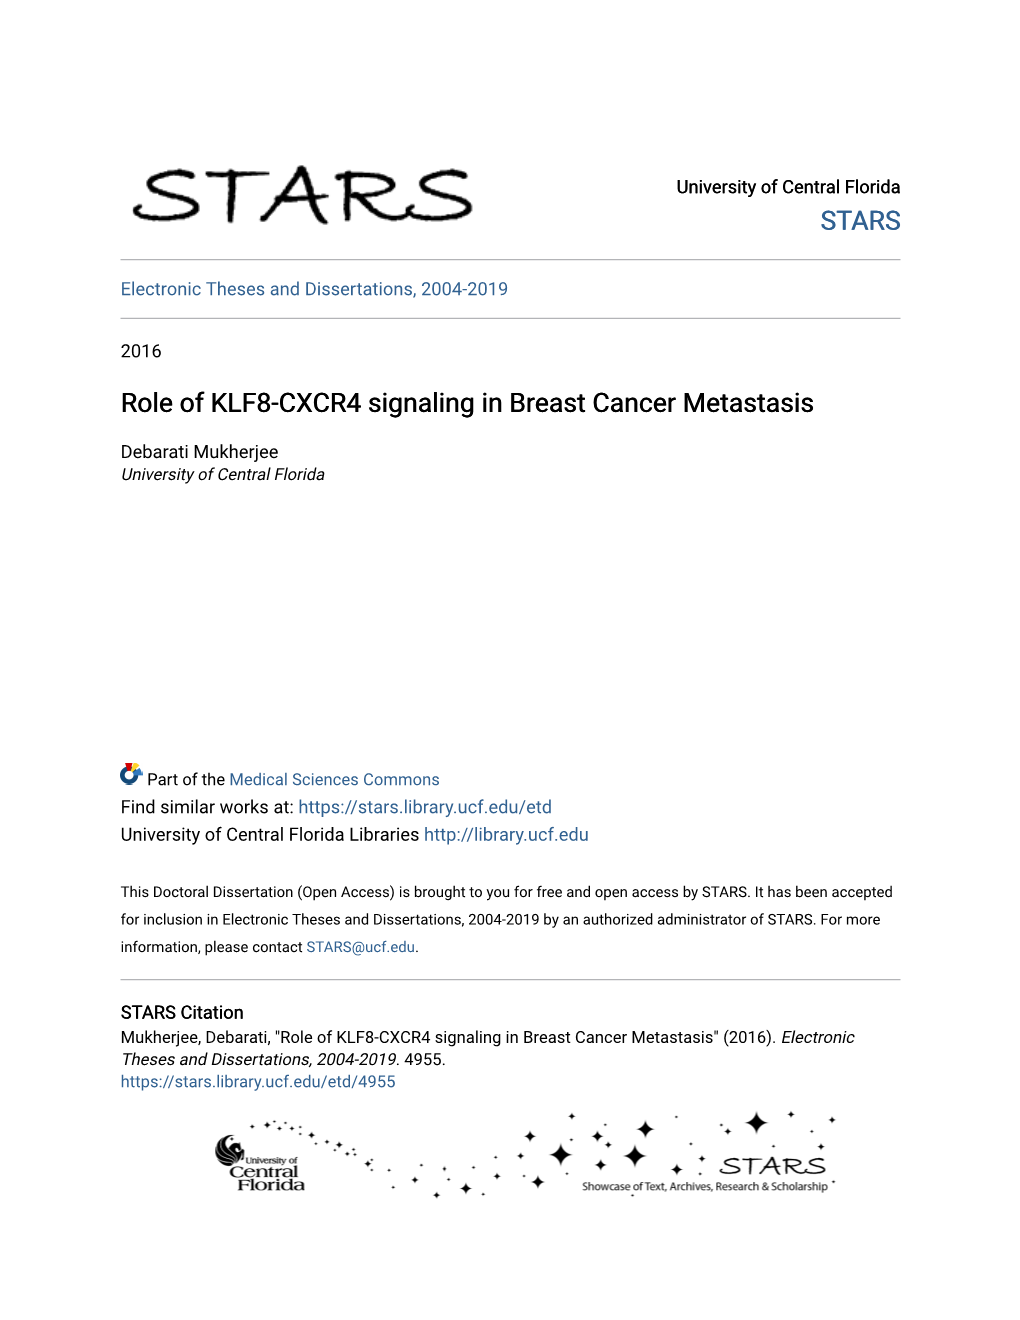 Role of KLF8-CXCR4 Signaling in Breast Cancer Metastasis